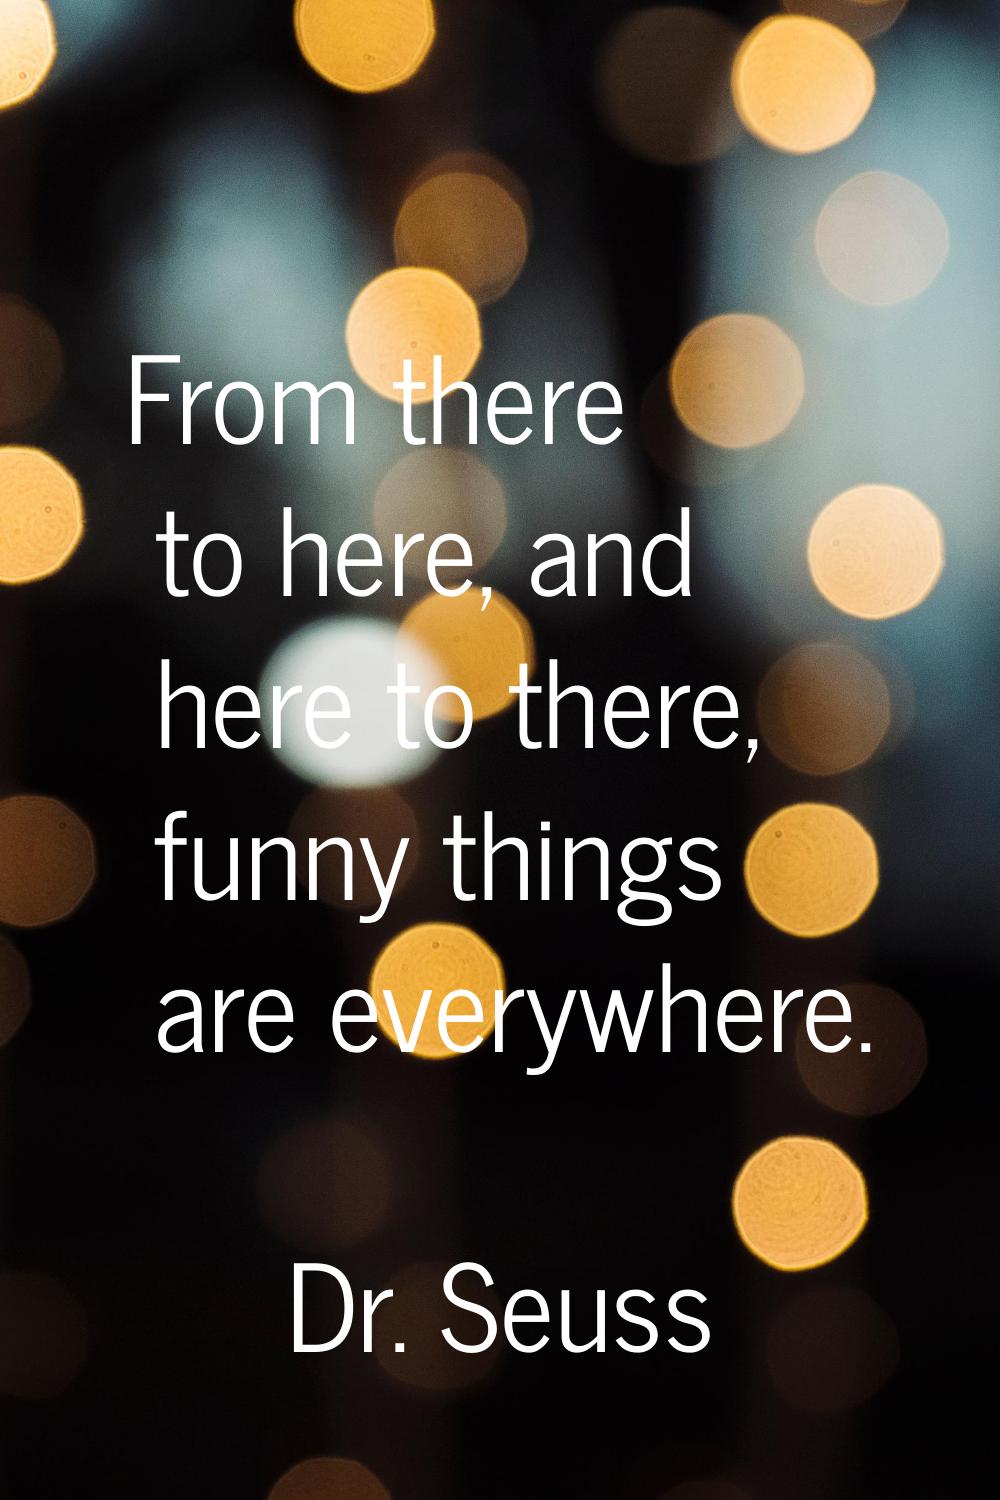 From there to here, and here to there, funny things are everywhere.